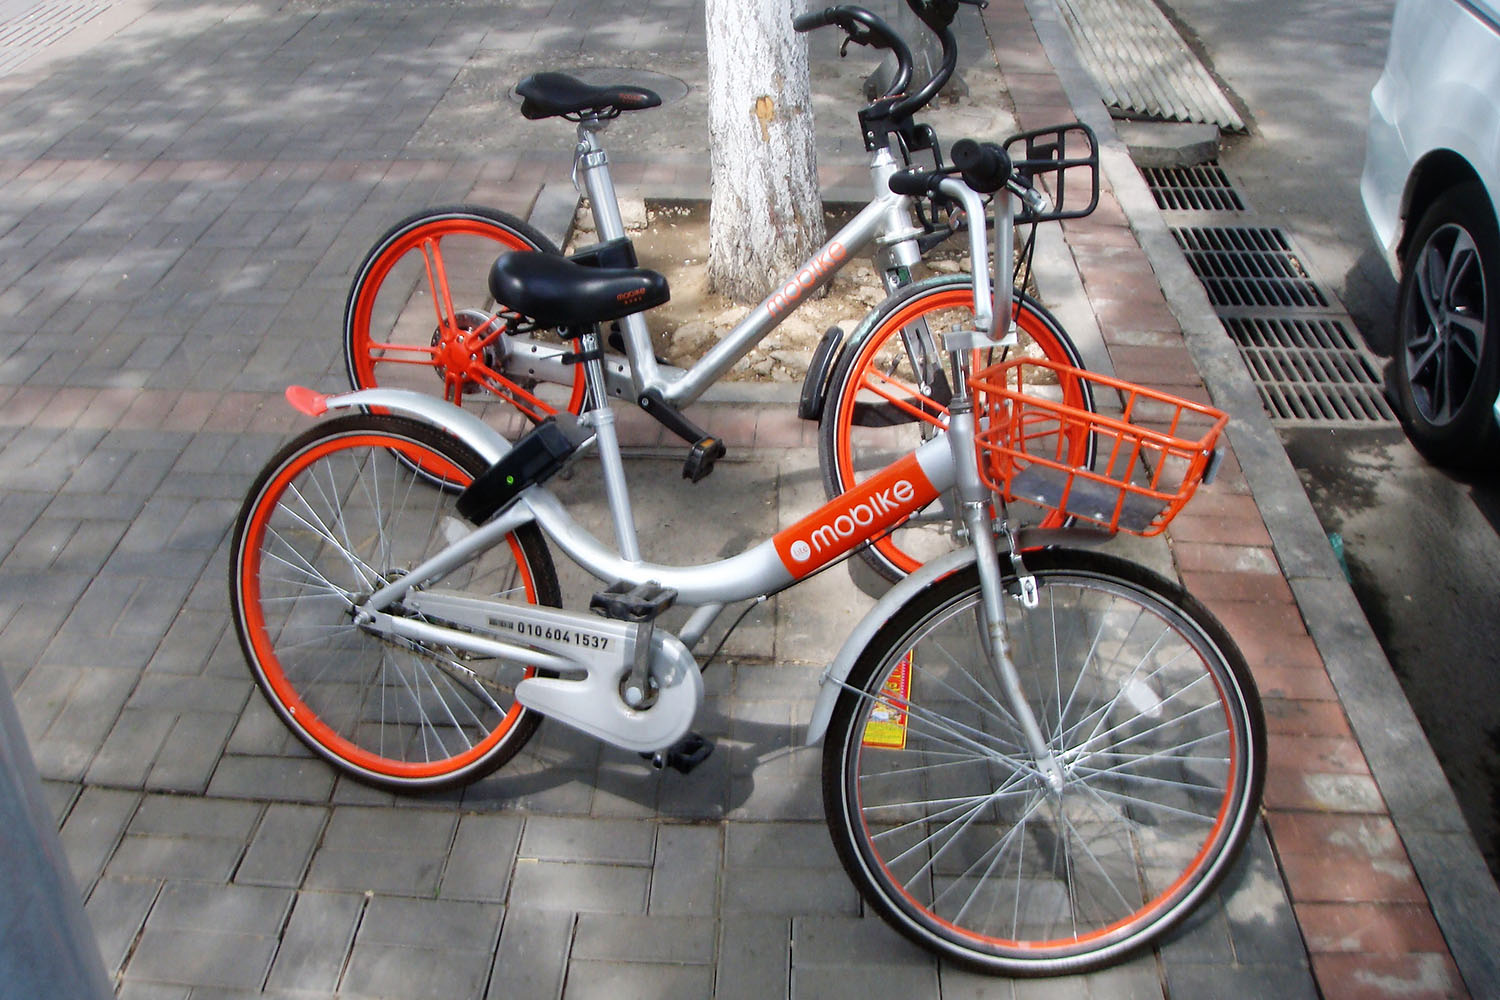 Mobike pulling out of Manchester this week after losing ten percent of its bicycles each month to theft and vandalism. Net.